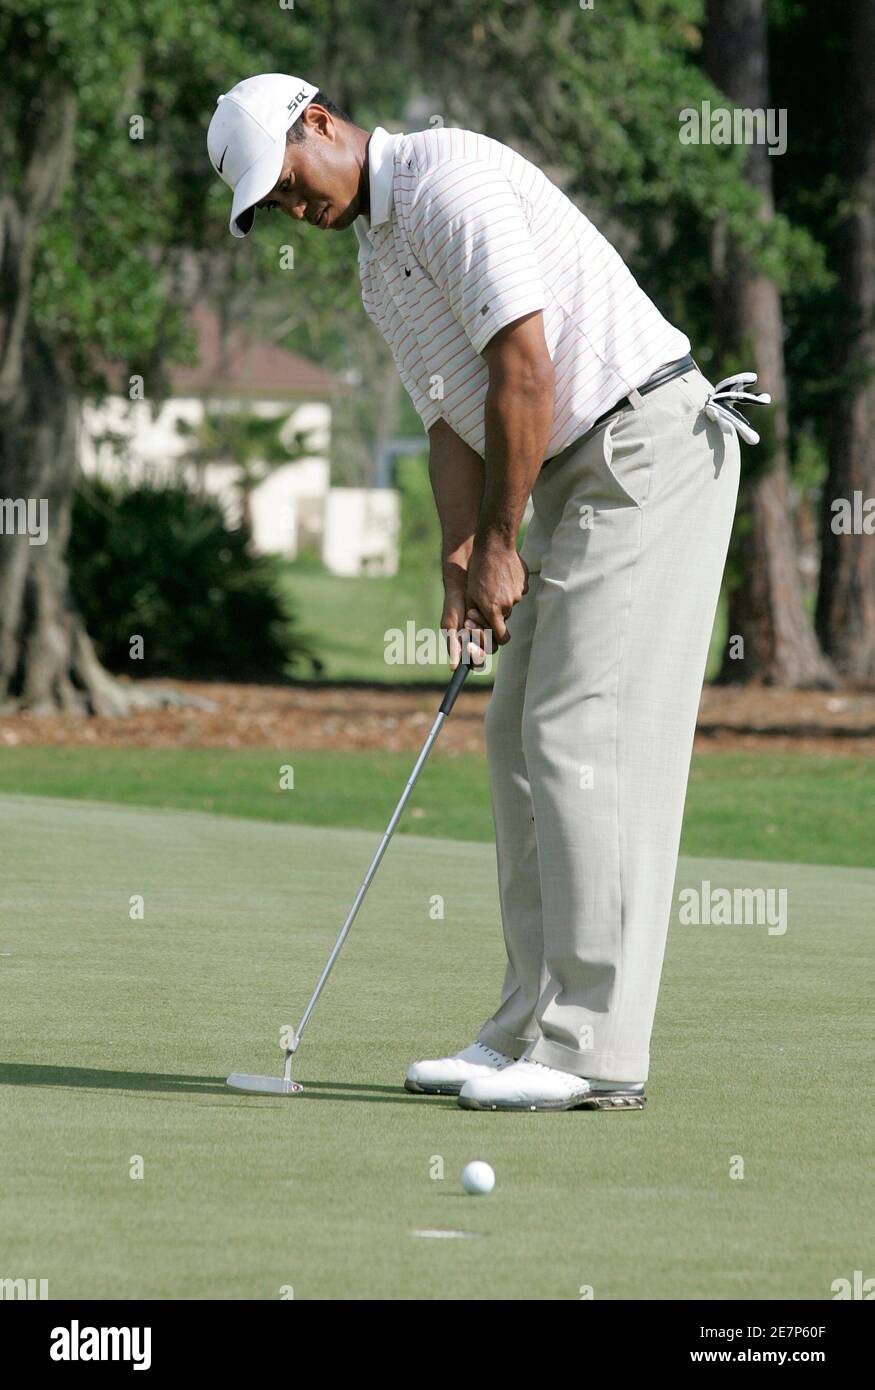 Tiger Woods watches as he misses a putt on the second green during the third round of play at The Players Championship golf tournament in Ponte Vedra Beach, Florida May 12, 2007. REUTERS/Rick Fowler (UNITED STATES) Stock Photo